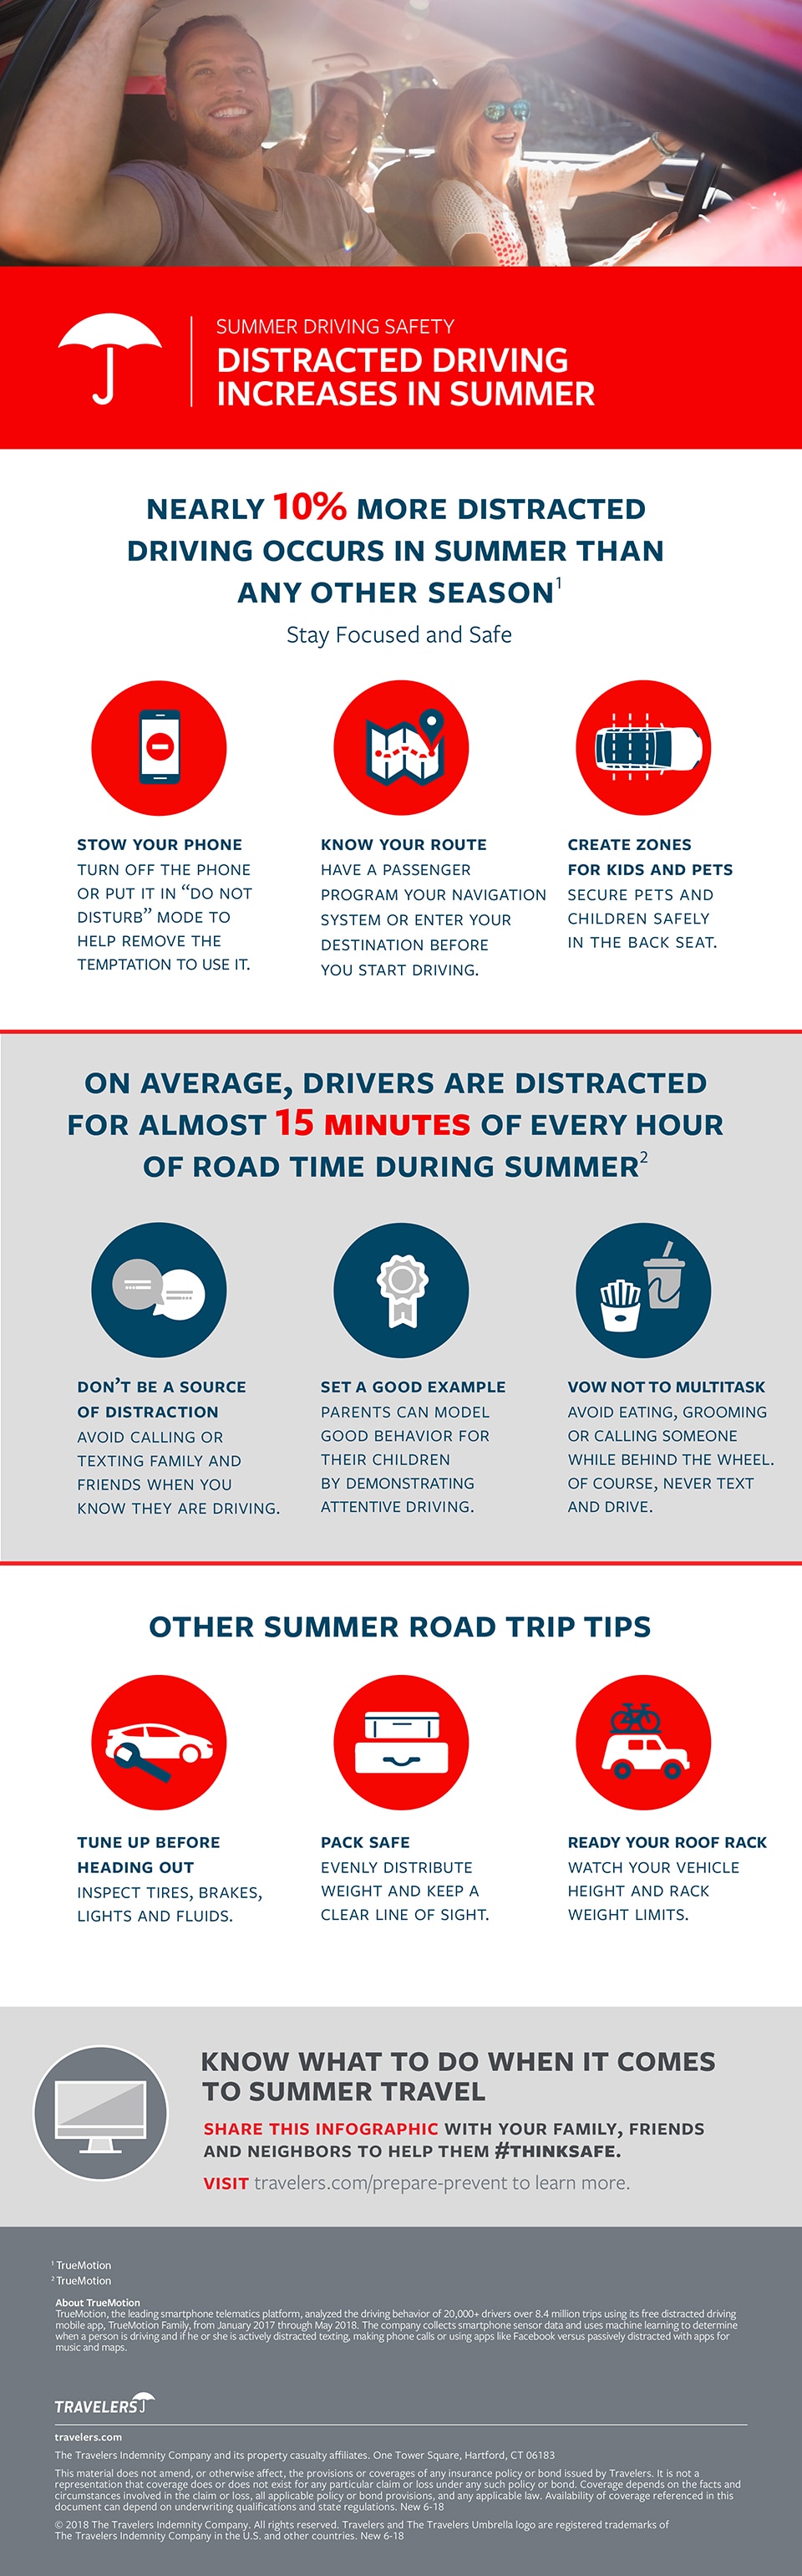 Summer Driving Safety, see details below